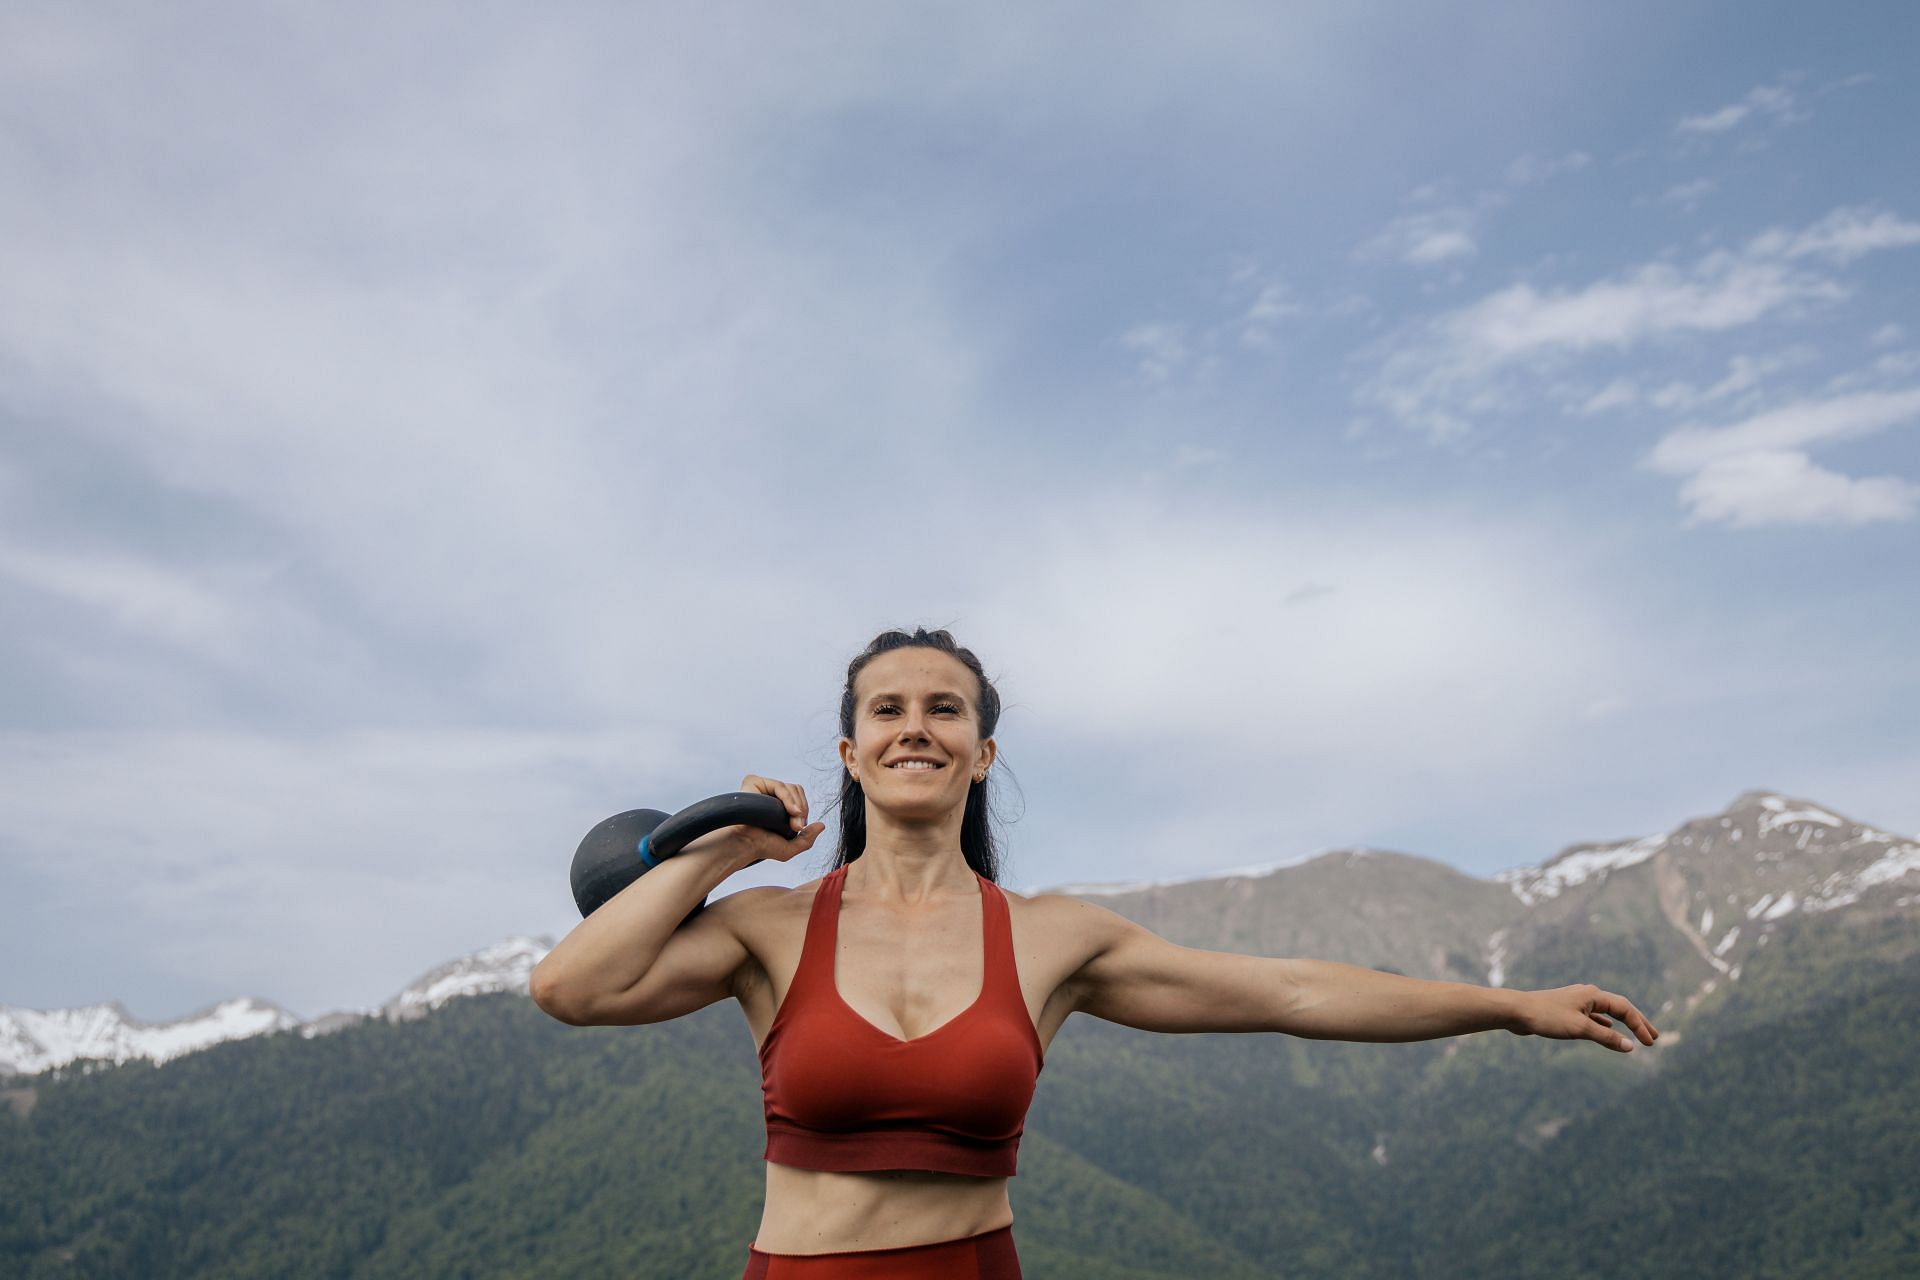 The kettlebell snatch utilizes every muscle in the body from head to toe. (Image via Pexels/Anastasia Shuraeva)